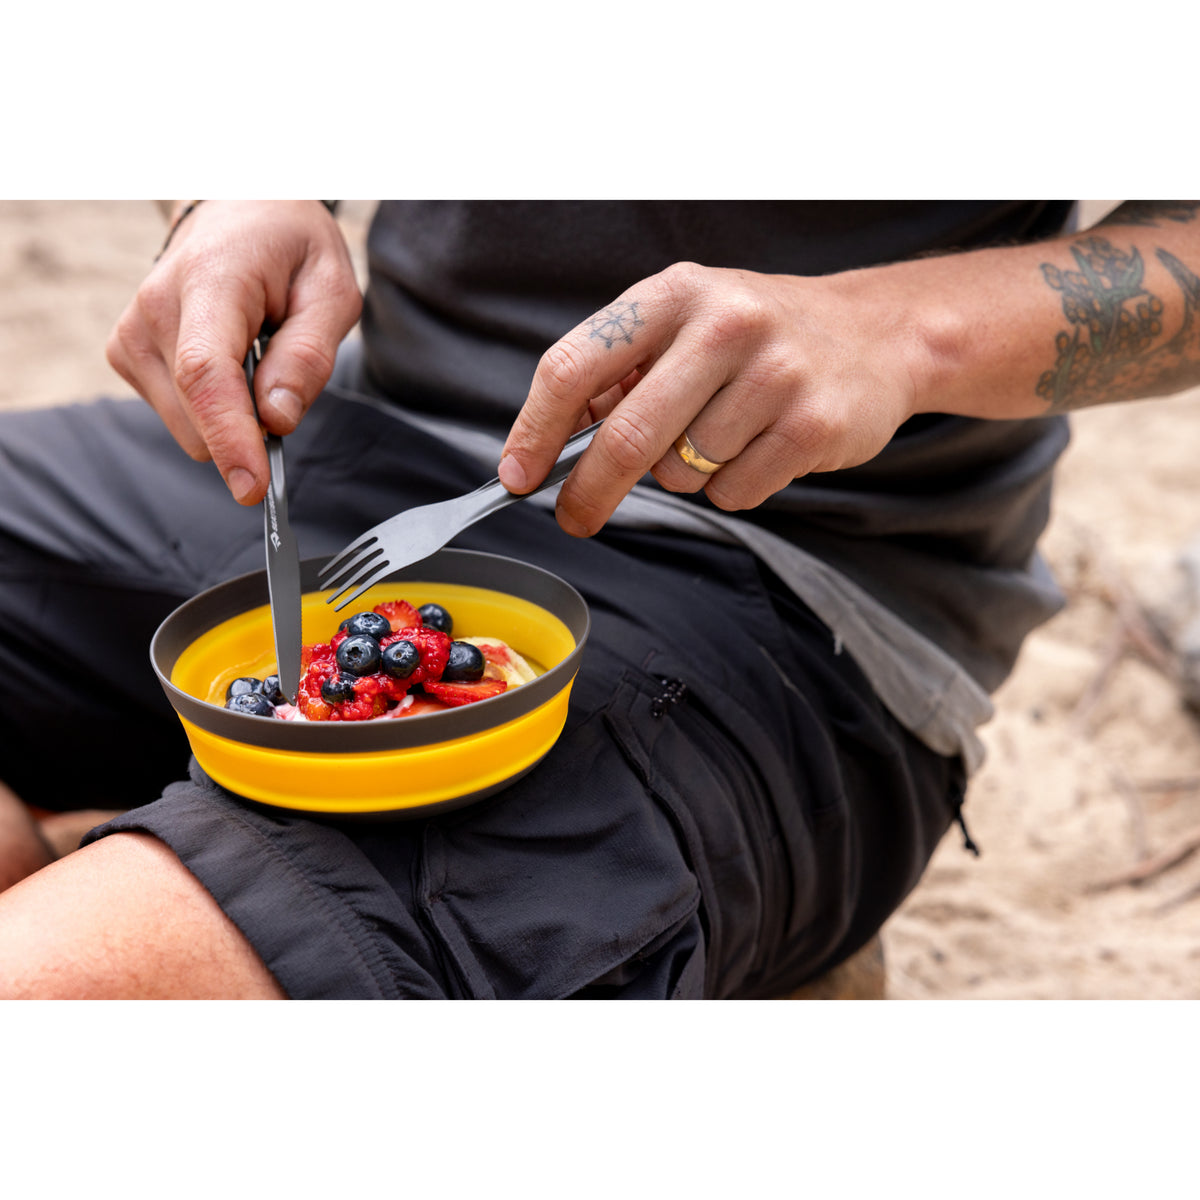 Sea to Summit Frontier Ultralight Collapsible Dinnerware Set (1 Person 3 Piece)